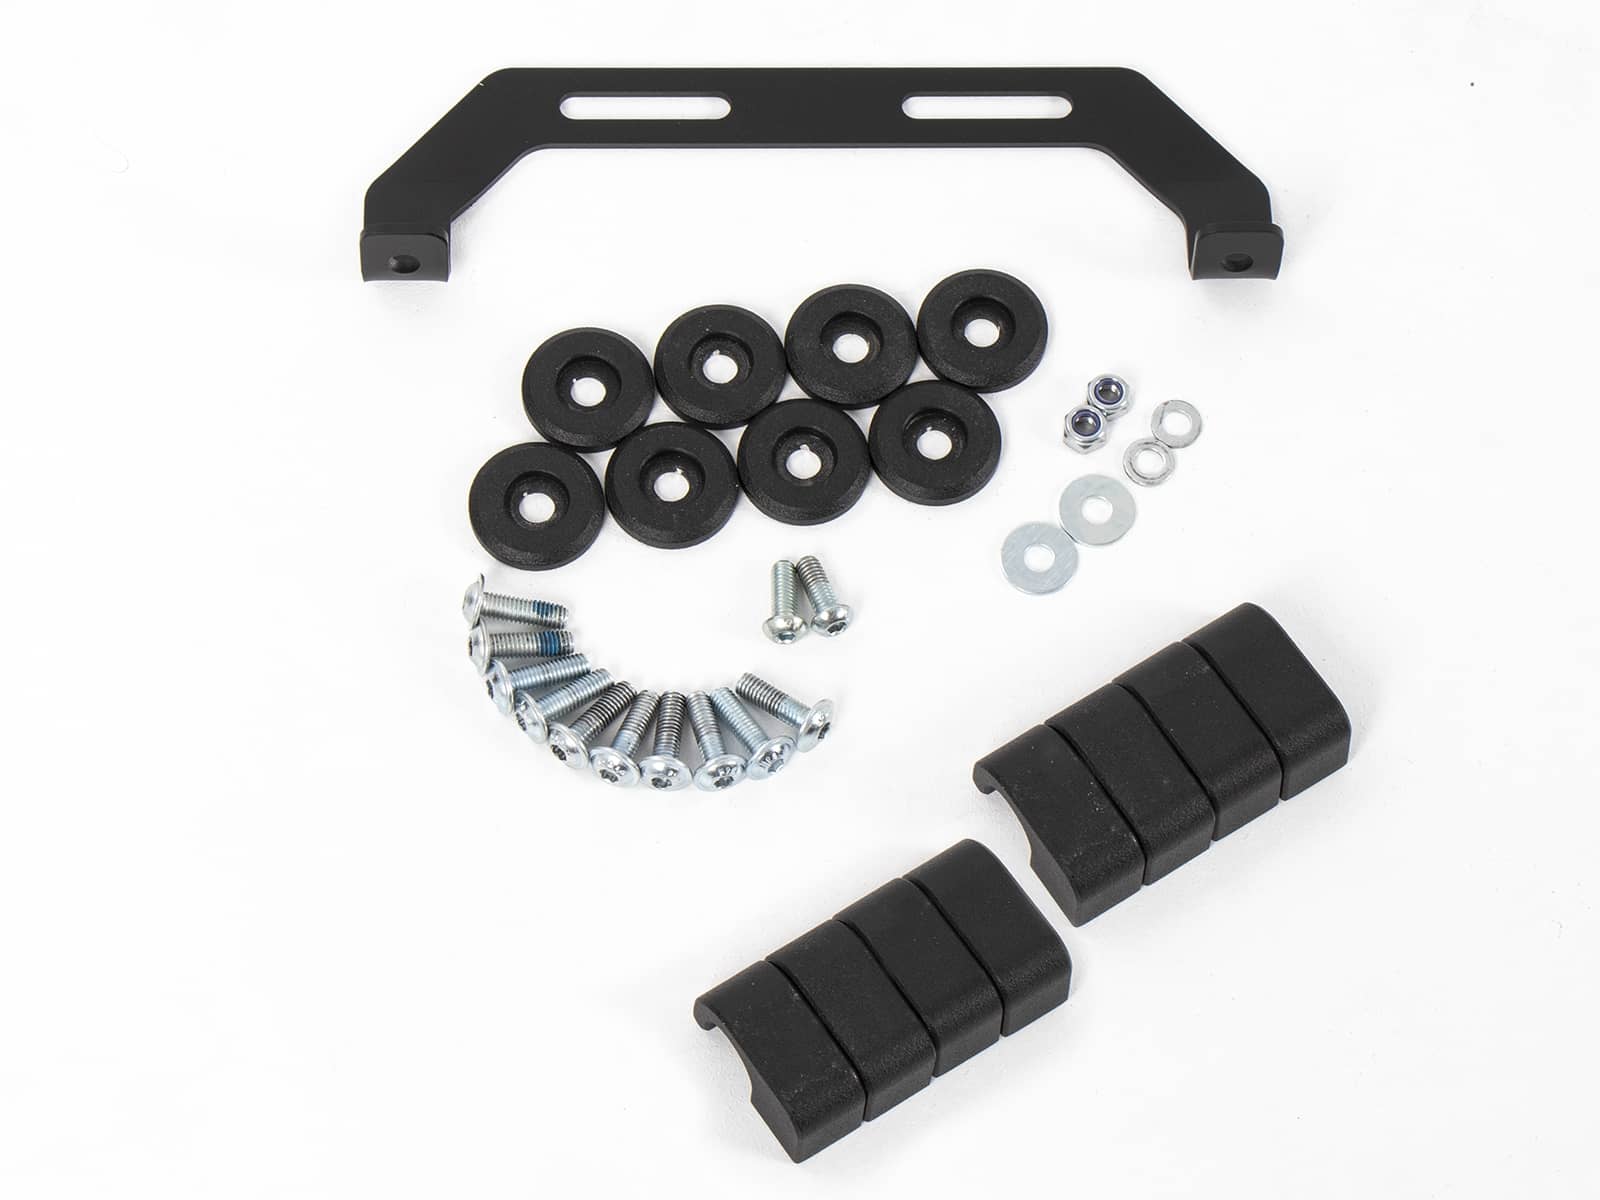 Mounting kit for Xtravel Basic universal holding plates to H&B cutout sidecase carrier